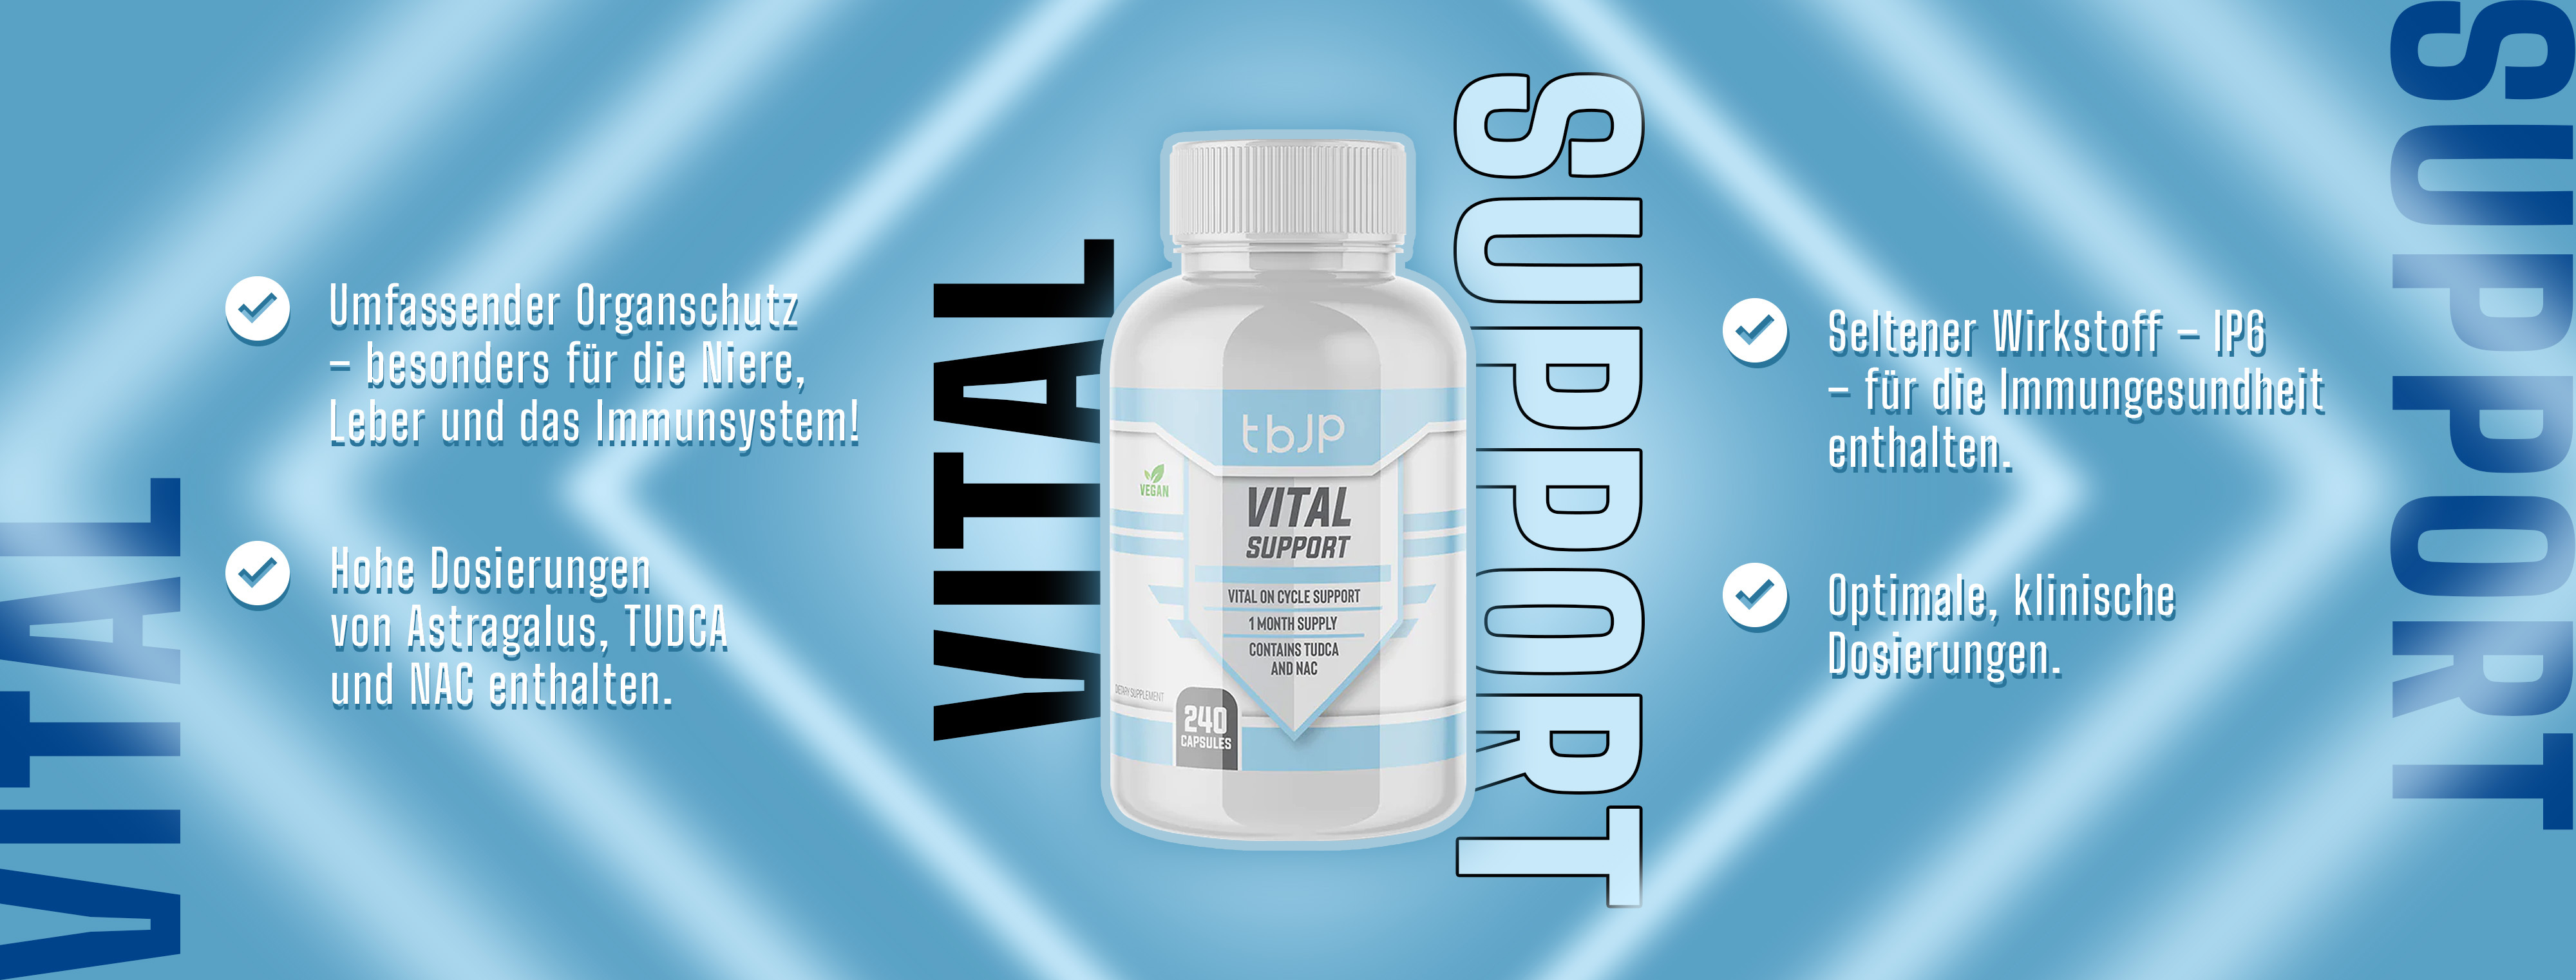 TrainedbyJP Vital Support